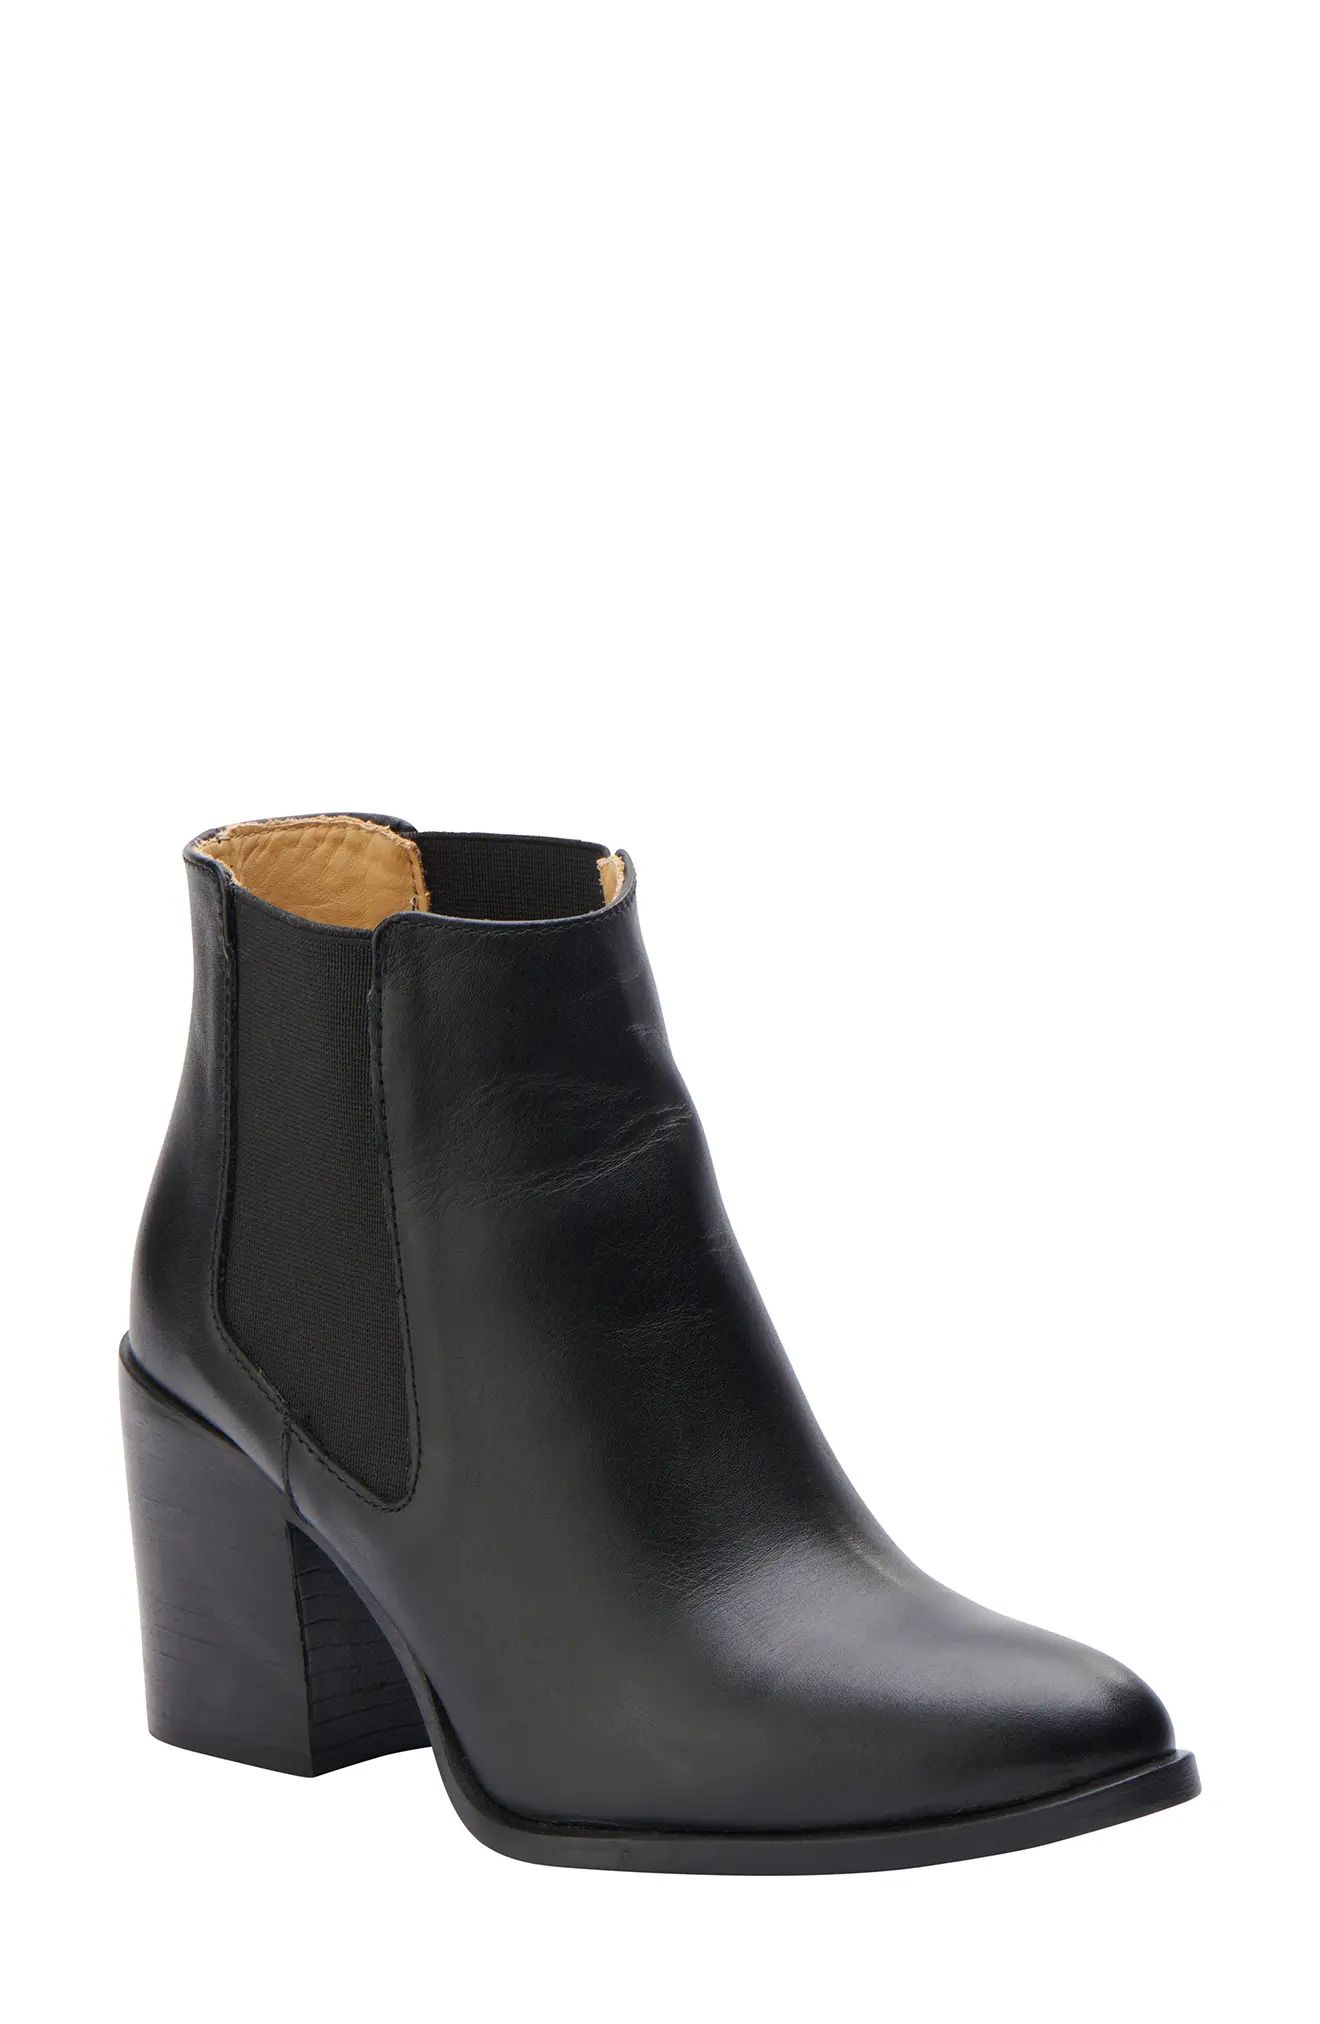 Nisolo Leather Chelsea Boot, Size 10 in Black at Nordstrom | Nordstrom